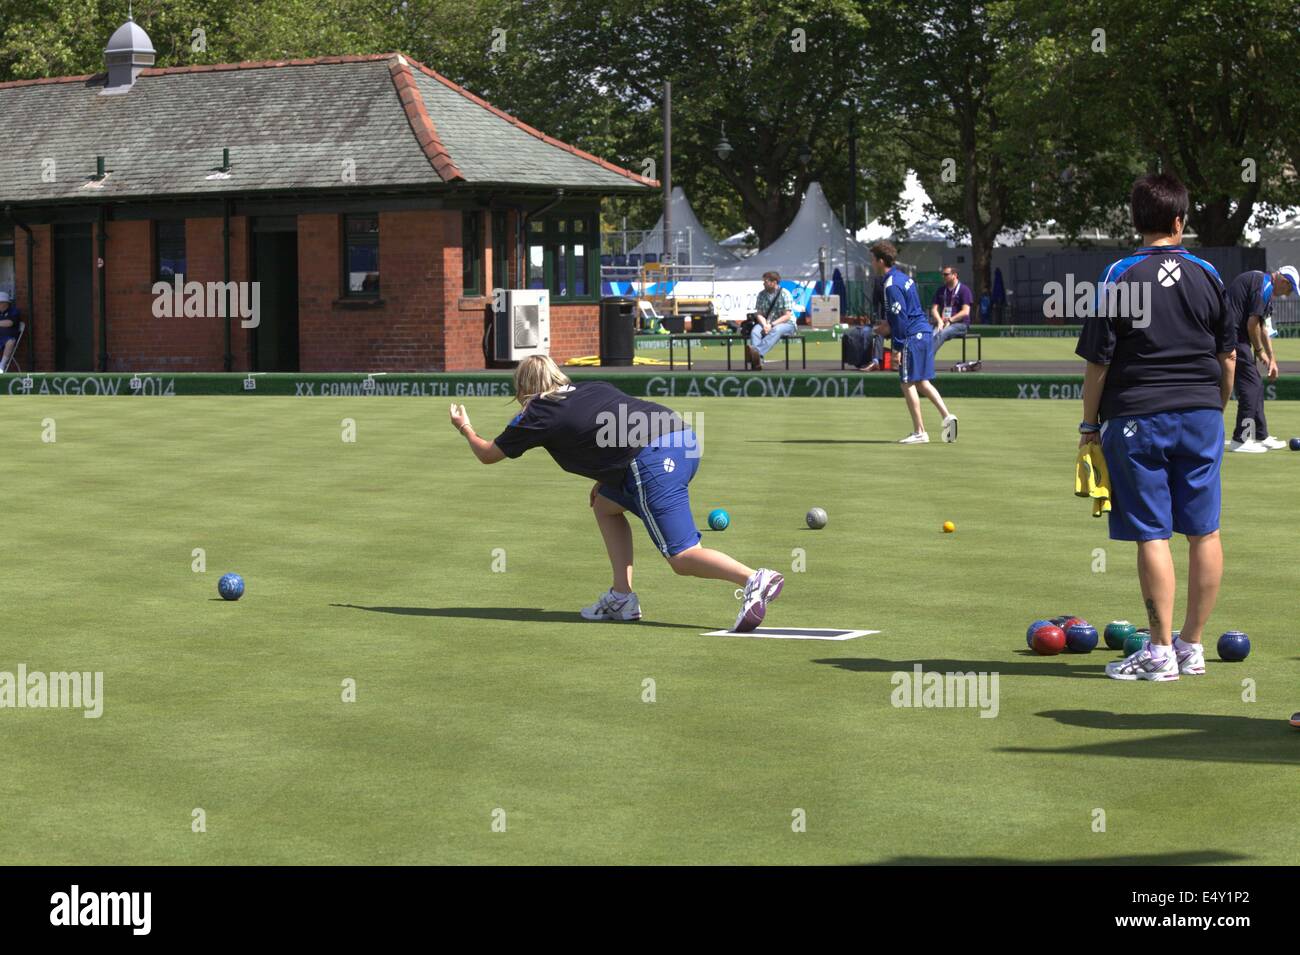 Kelvingrove Lawn Bowls Centre, Glasgow, Scotland, UK, Thursday, 17th July, 2014. Team Scotland training in the venue for the 2014 Commonwealth Games Lawn Bowls Competition Stock Photo